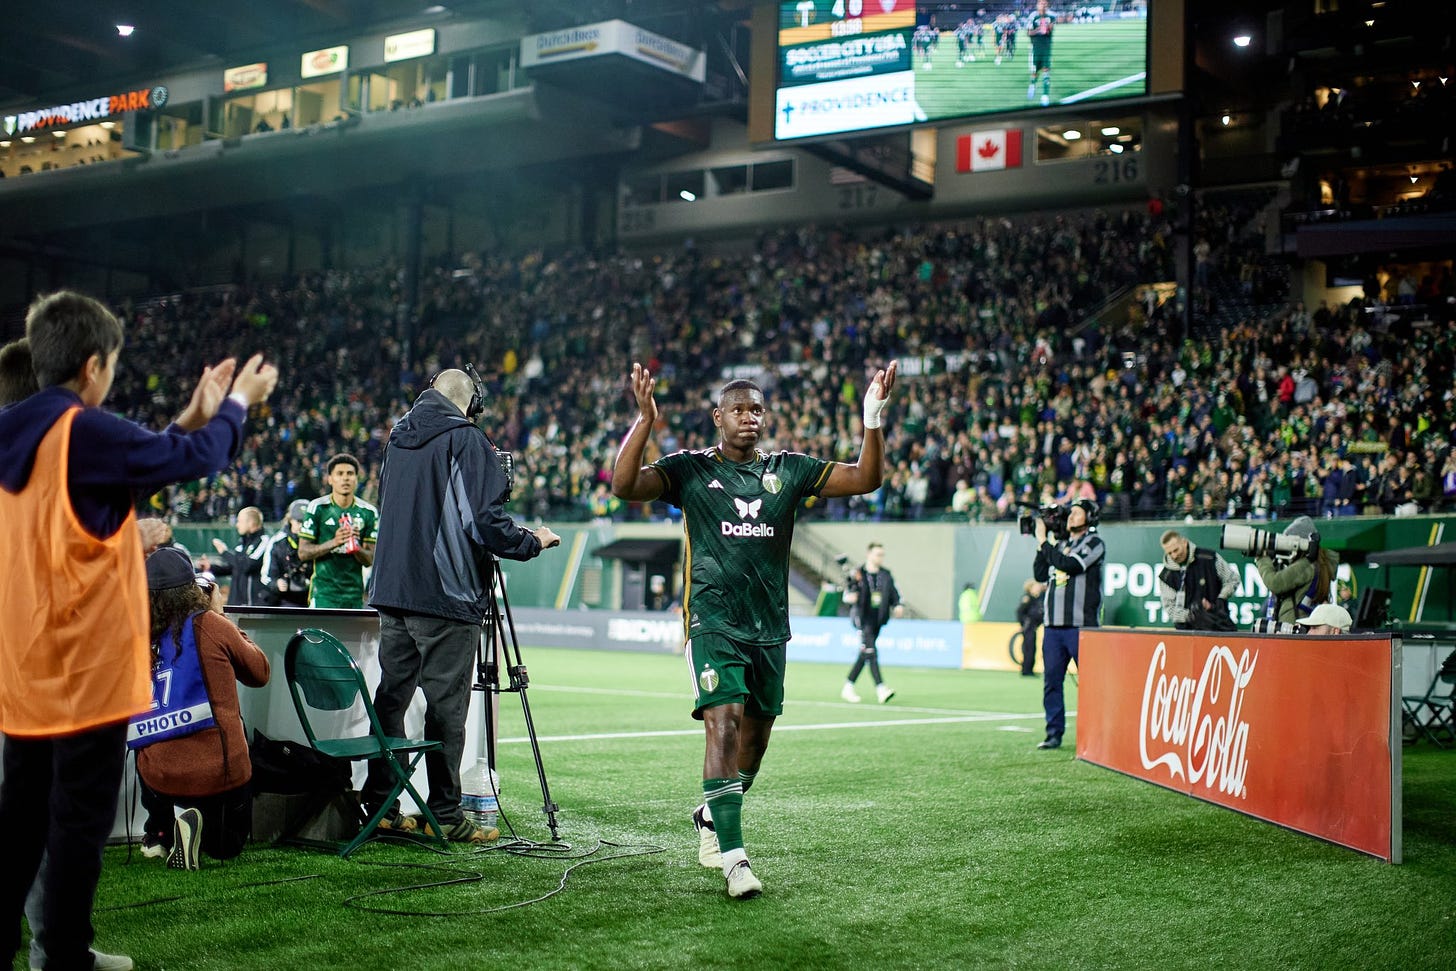 Kamal Miller on X: "A Debut To Remember 💚 Timbers Army I Love You Already  🌲🪵 We Go Again Saturday 🙏🏾 #RCTID #KM4 https://t.co/TljCH058fM" / X